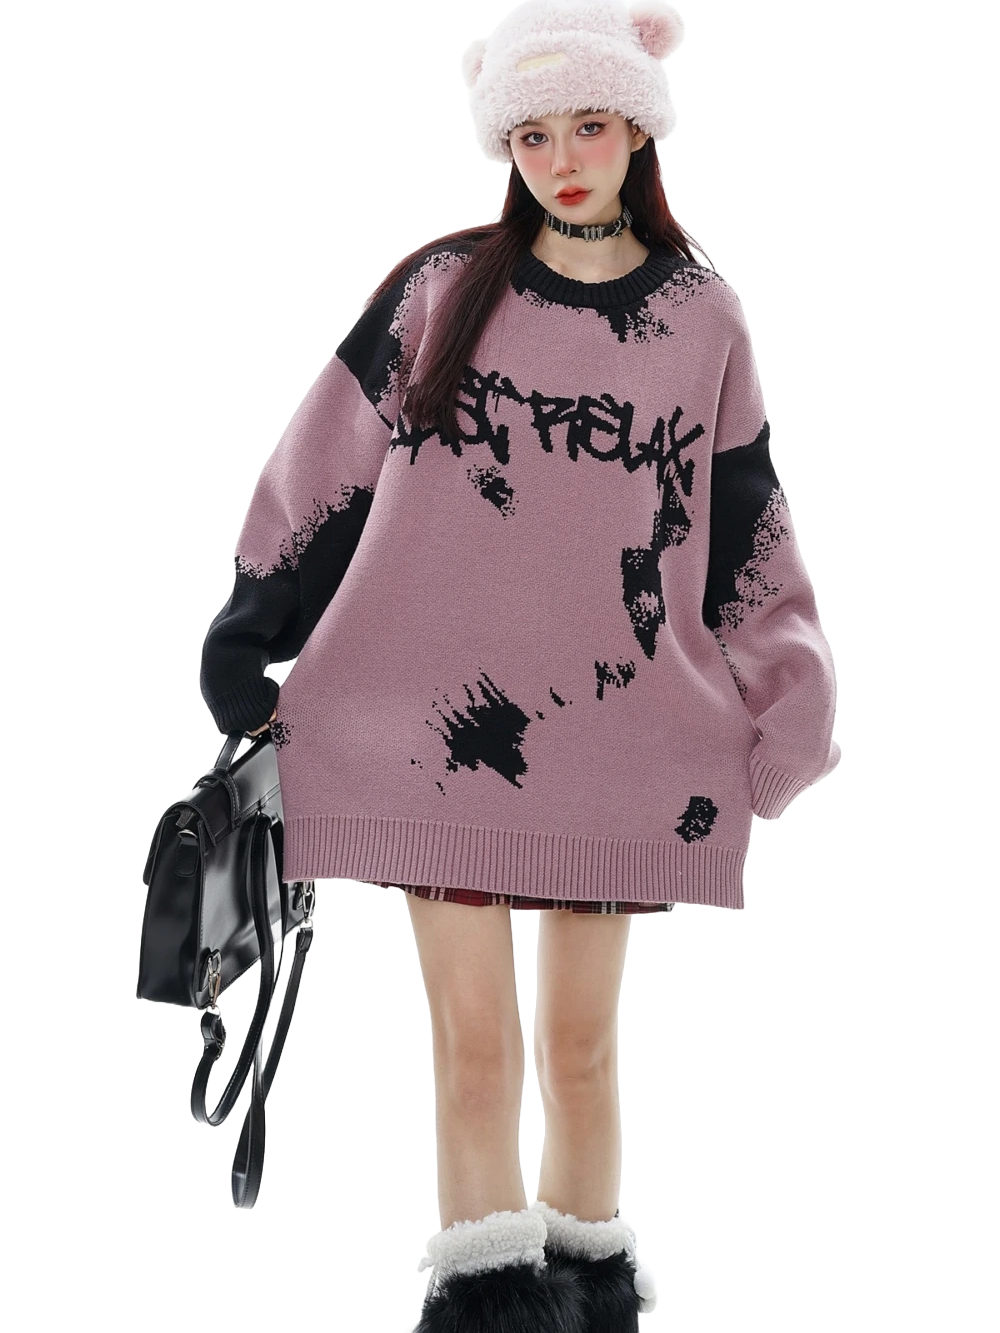 'Relax' Oversized Knit Sweater